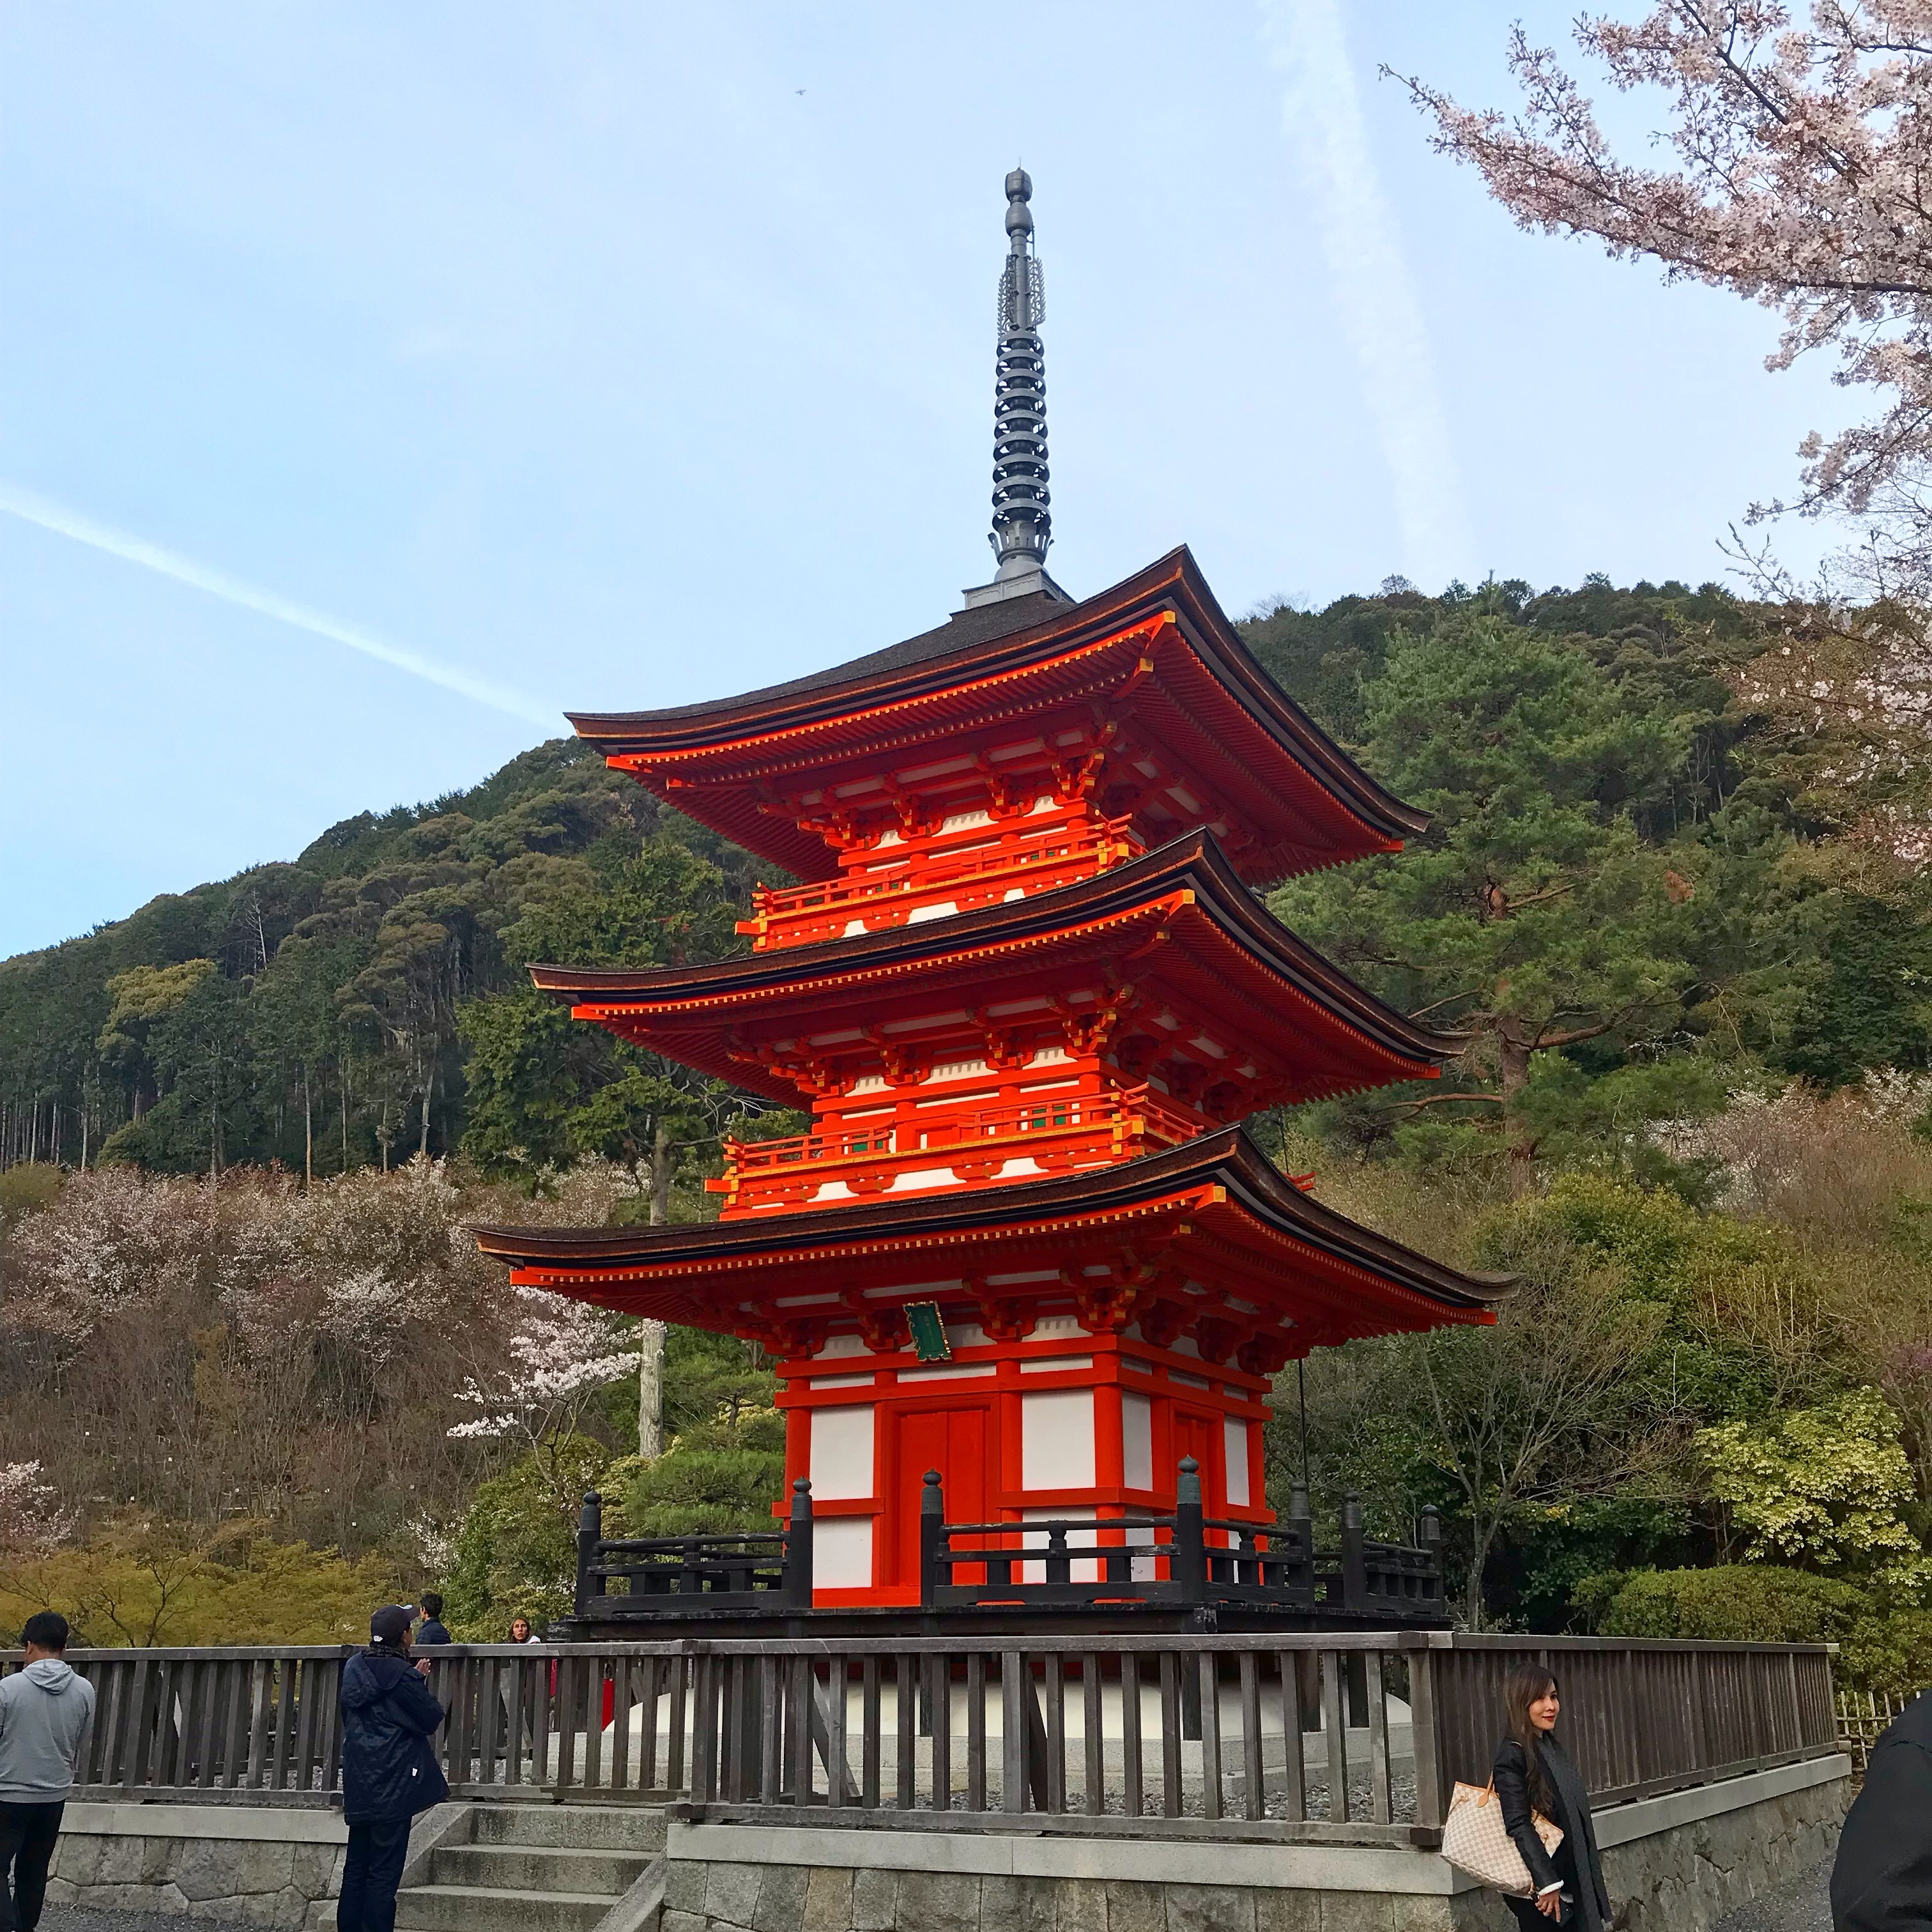 Japanese pagoda at Kiyomizudera, one of the tallest of its kind in Japan, standing at 31 meters high